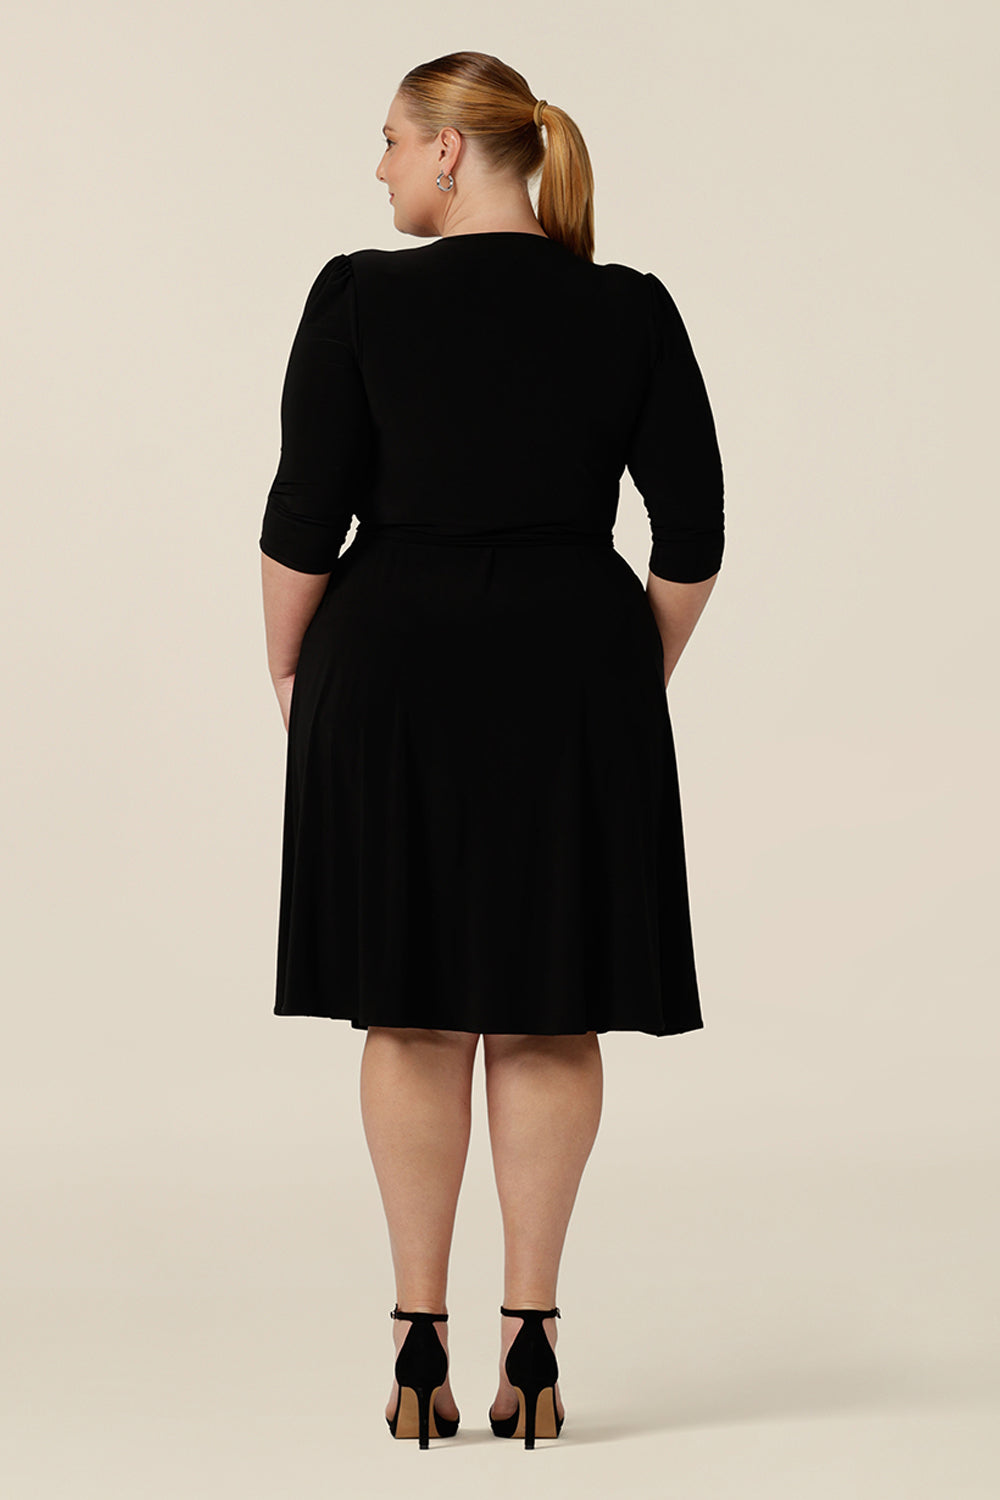 Back view of a good going out dress for plus size women. This knee length wrap dress in black jersey has 3/4 sleeves and pockets.  Shown for plus size women, shop made in Australia dresses in sizes 8 to 24.